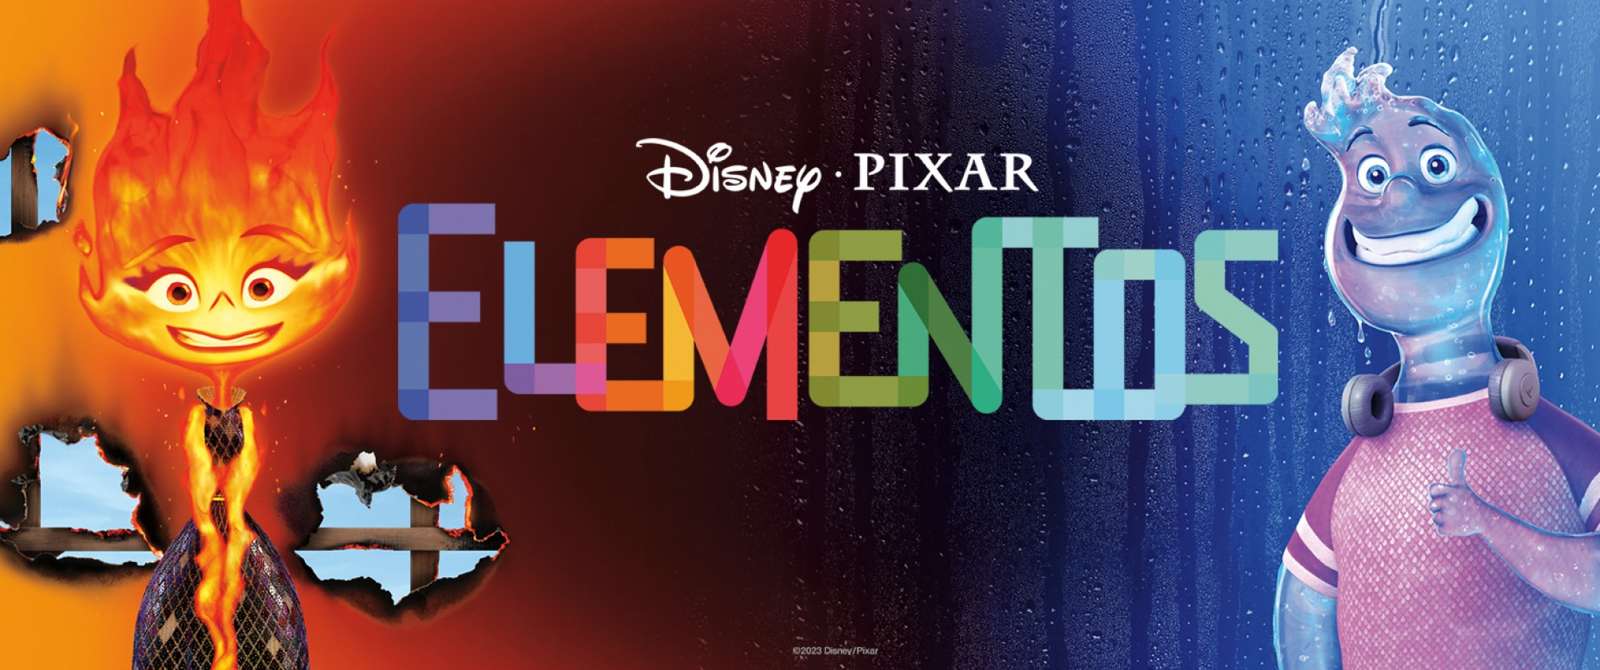 FILM - THE ELEMENTS puzzle online from photo